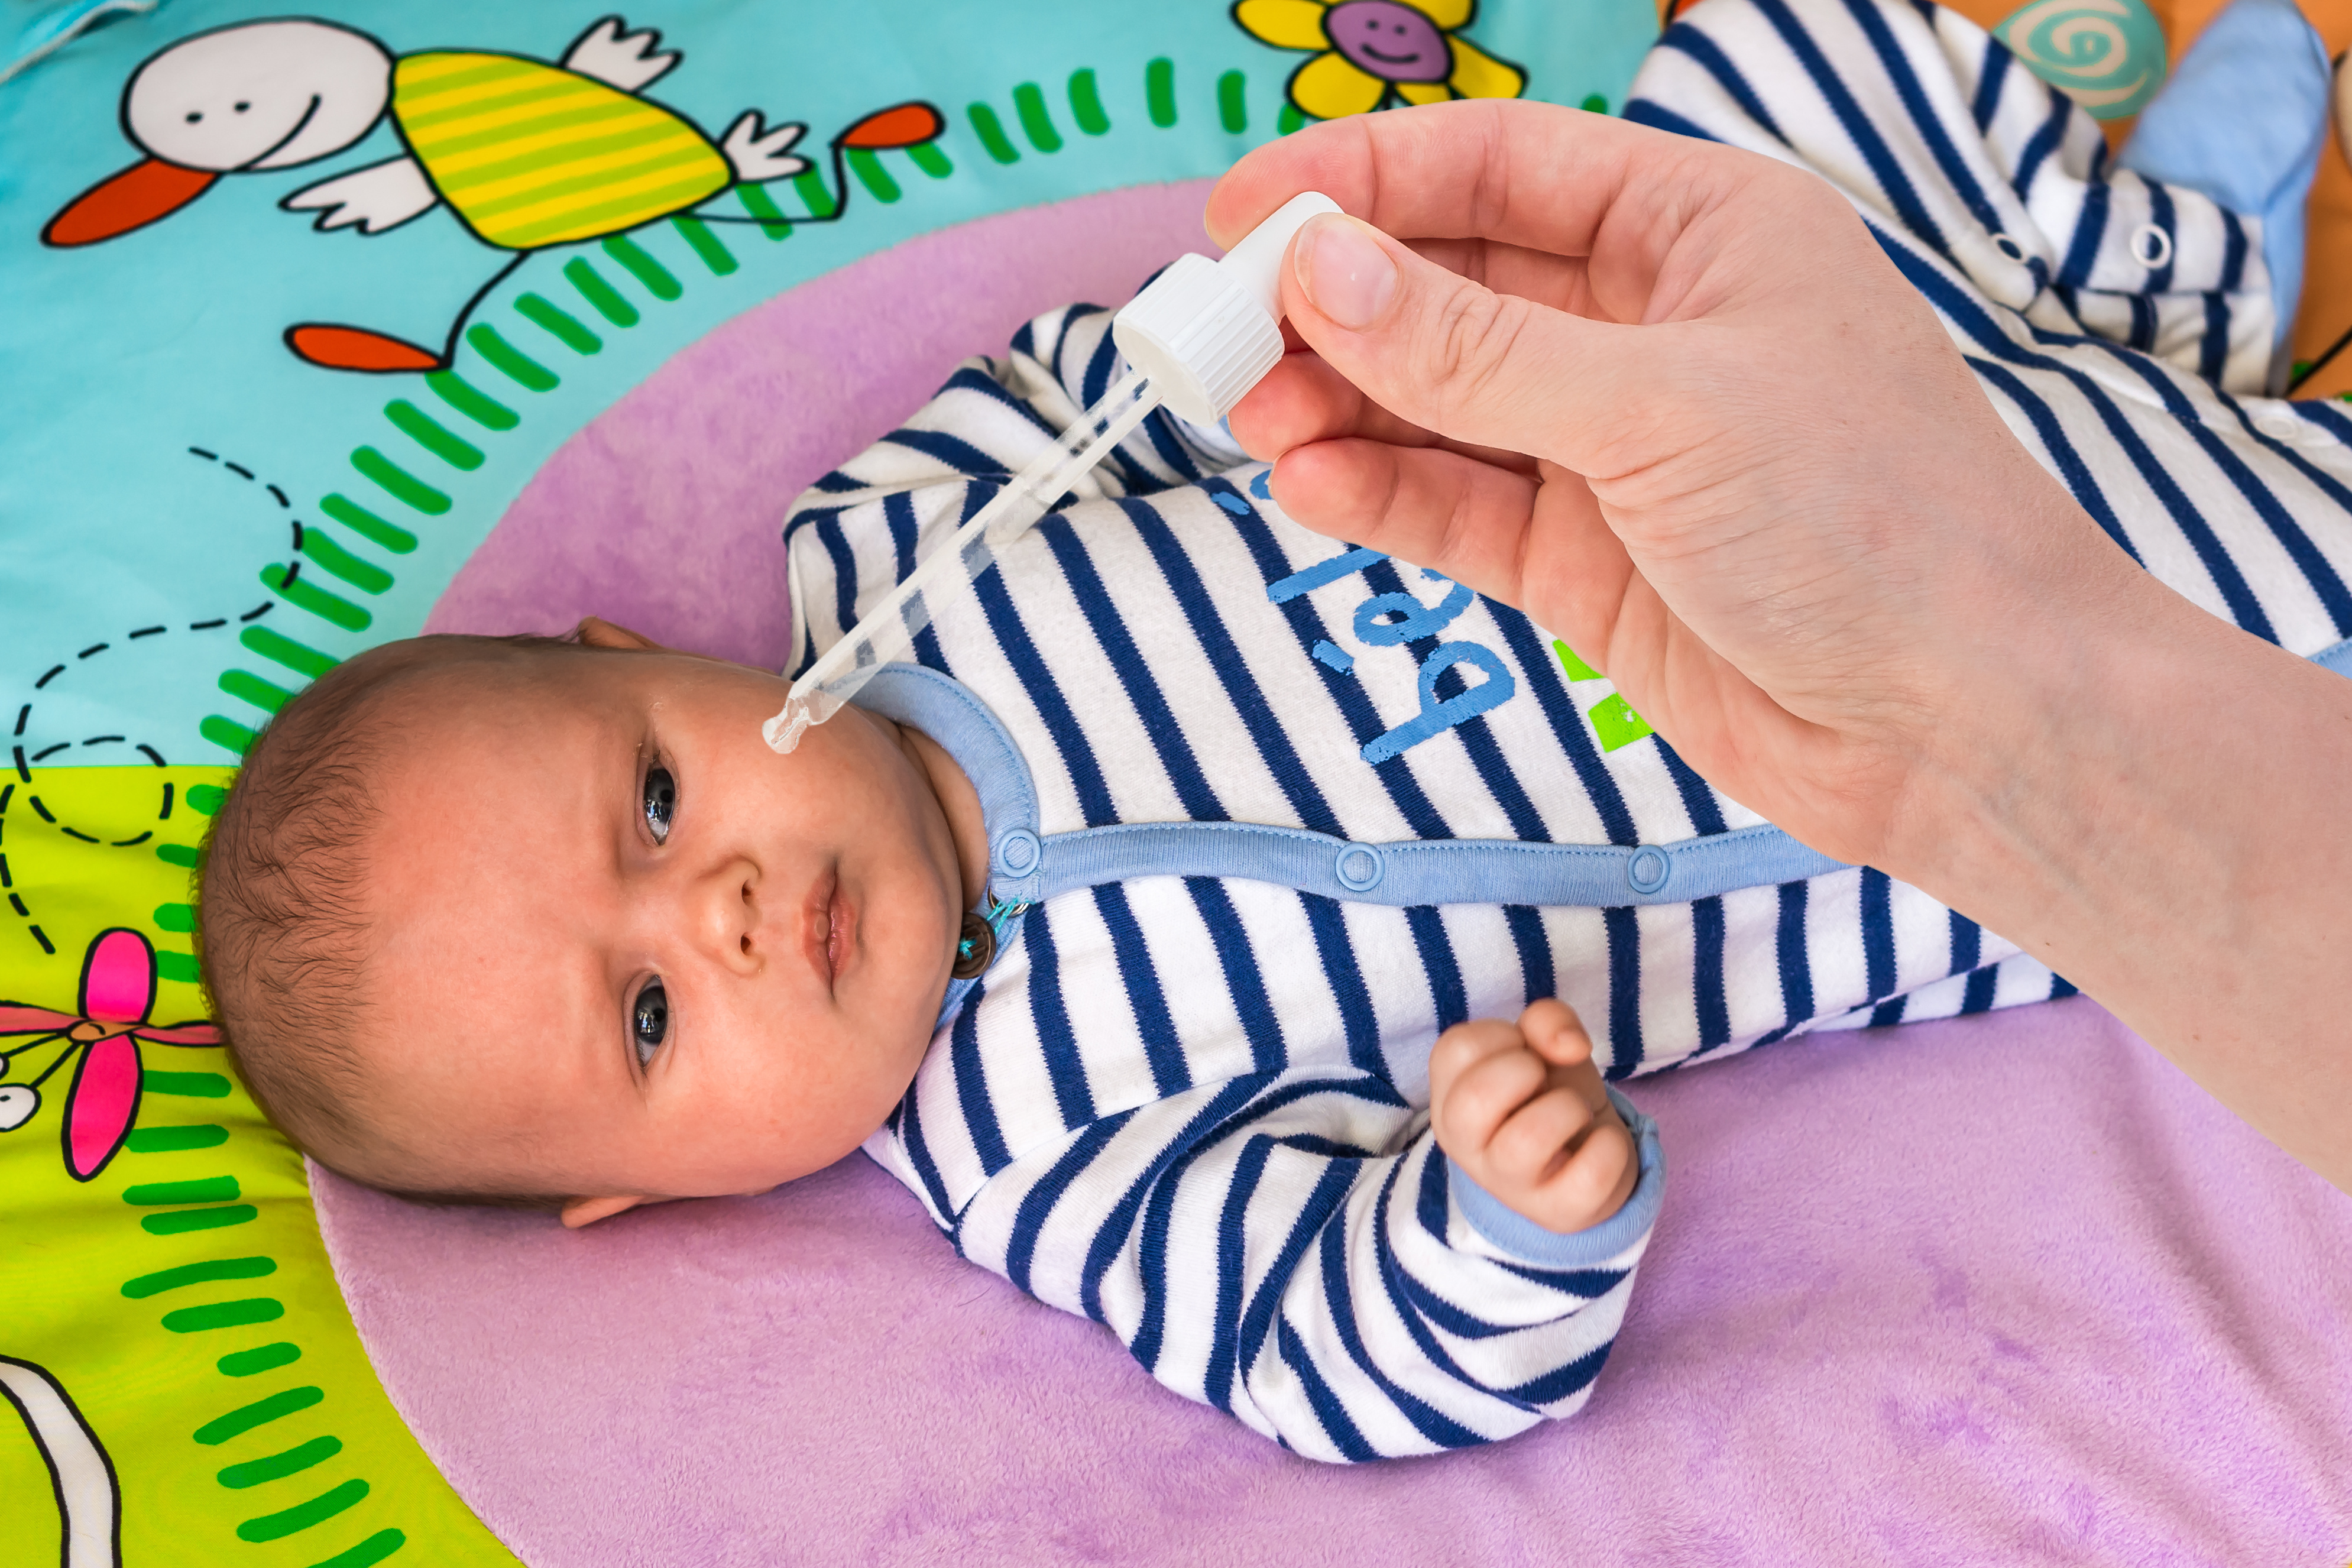 Atropine eye drops for babies and toddlers